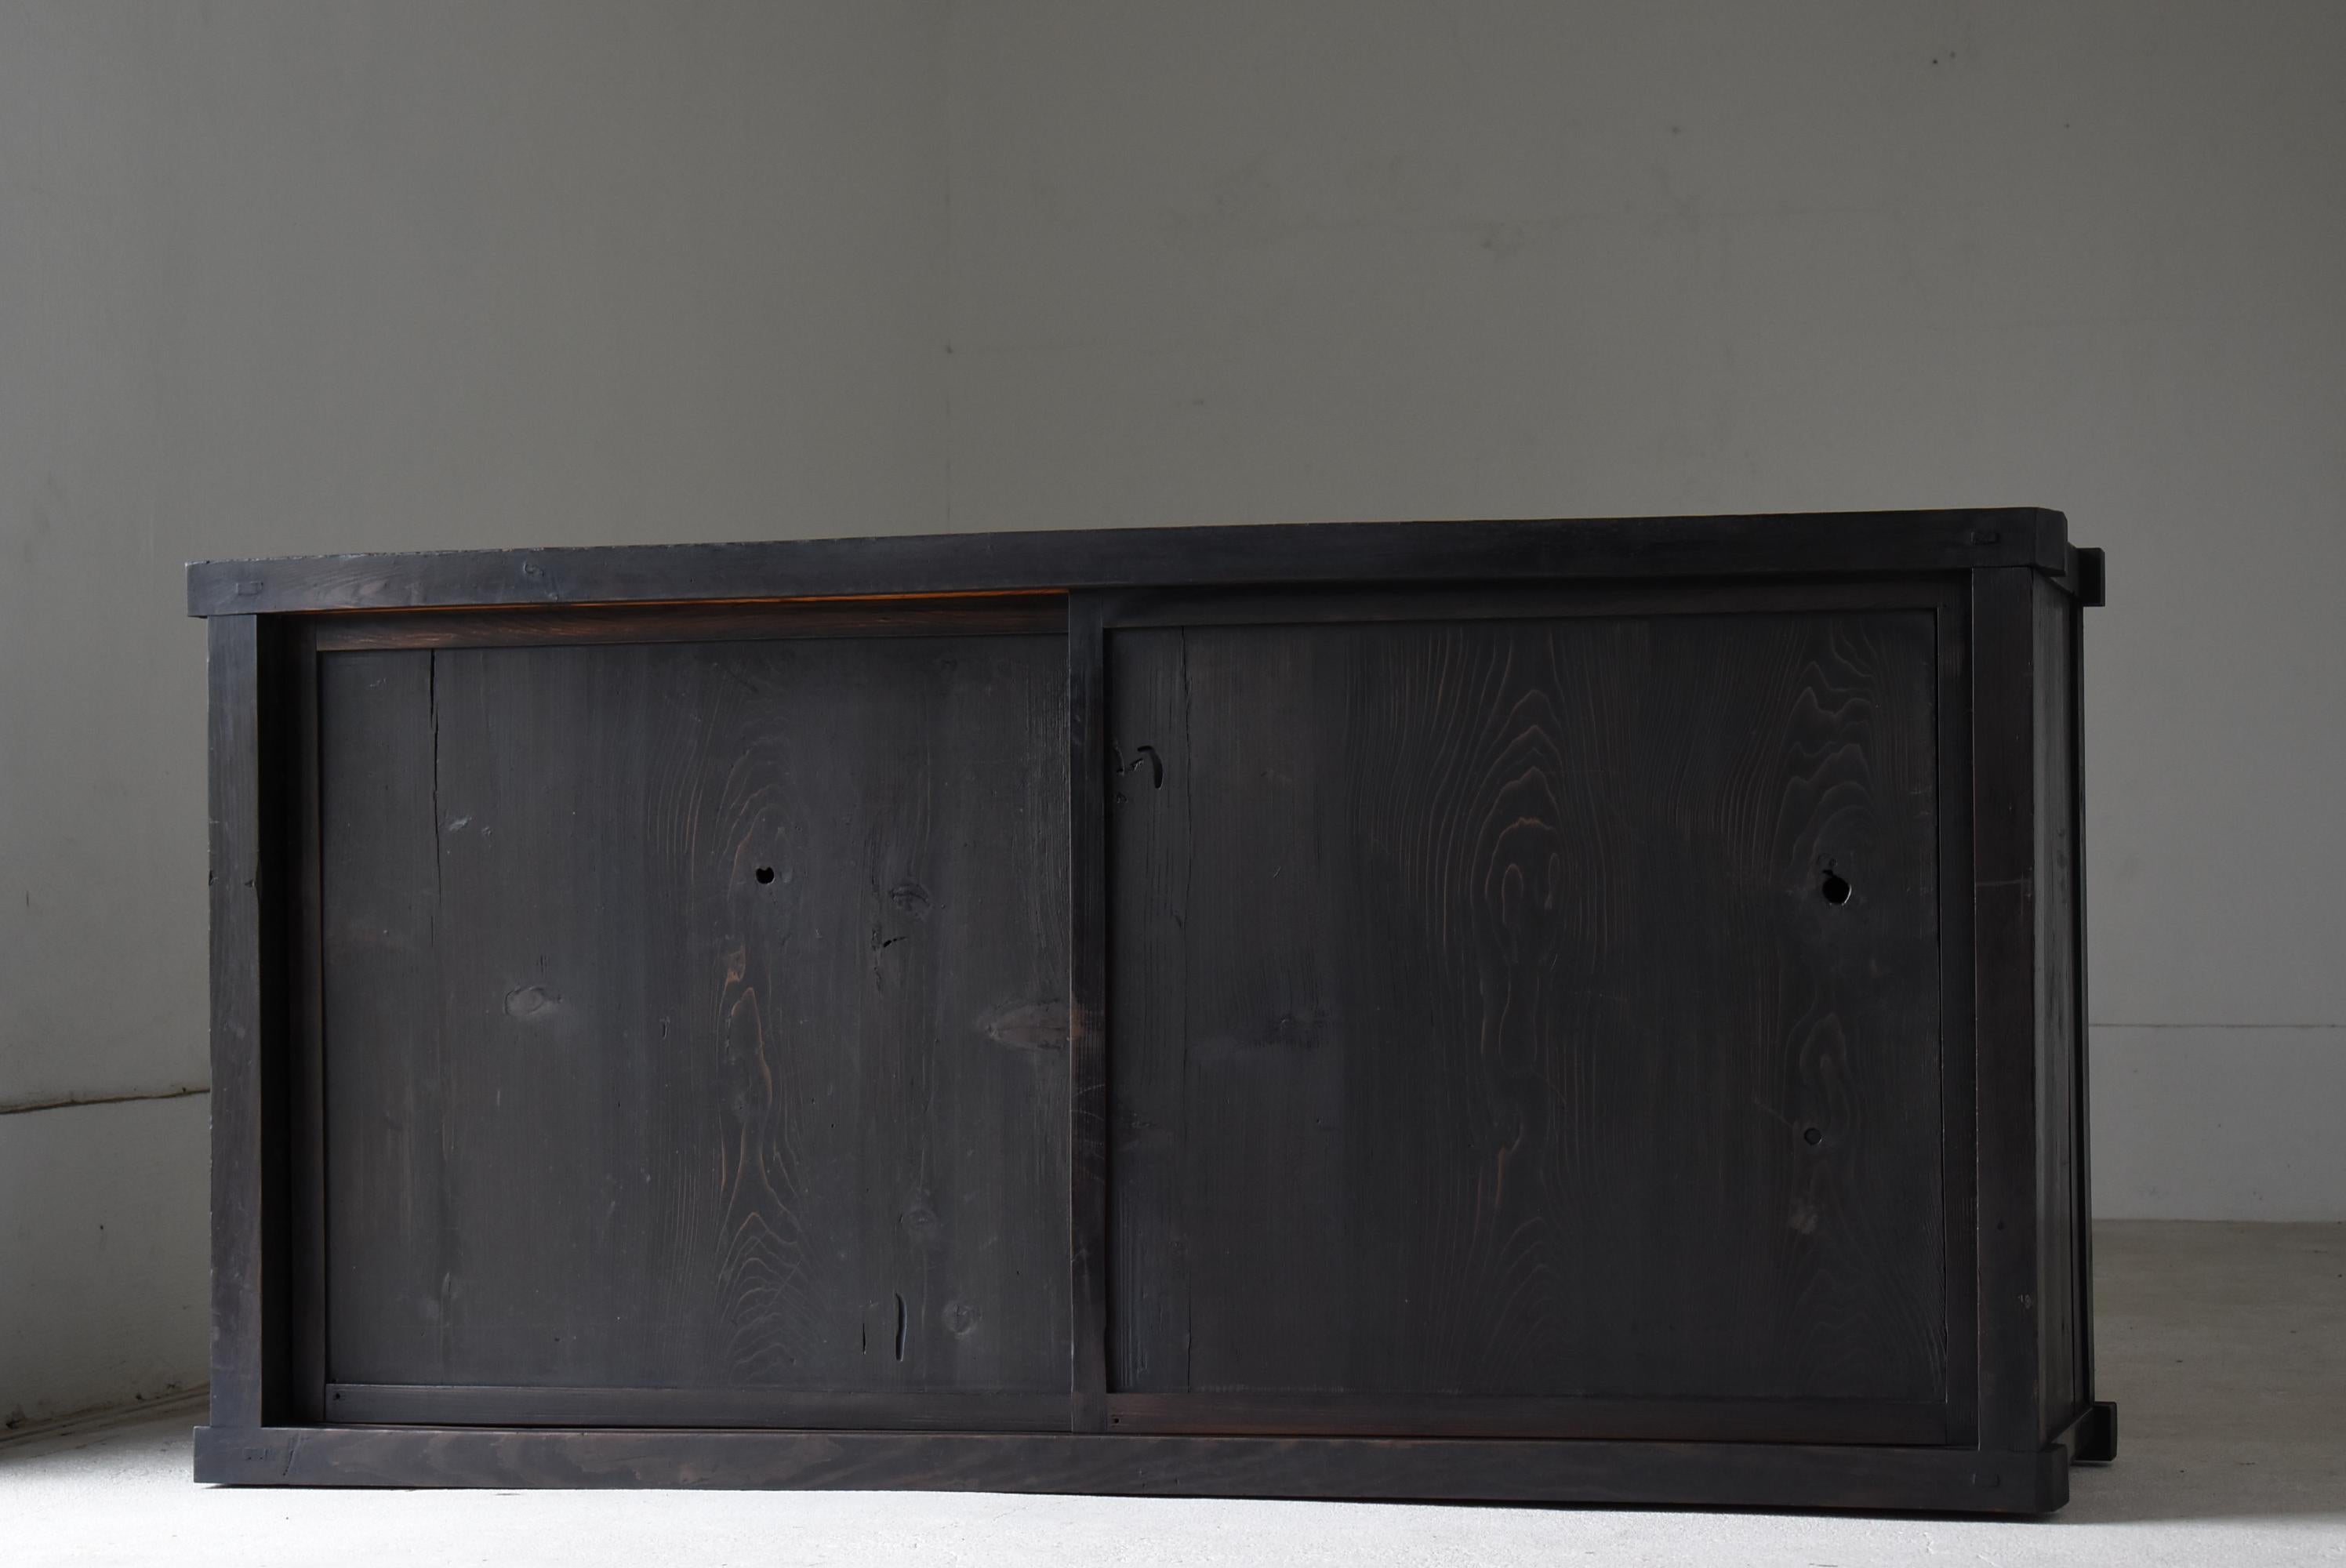 This is an old Japanese black large tansu.
It is from the Meiji period (1860s-1900s).
It is made of cedar wood.
It is very rare.

It is simple and cool with no unnecessary decoration.
It is the ultimate in simplicity.
This is beautiful in